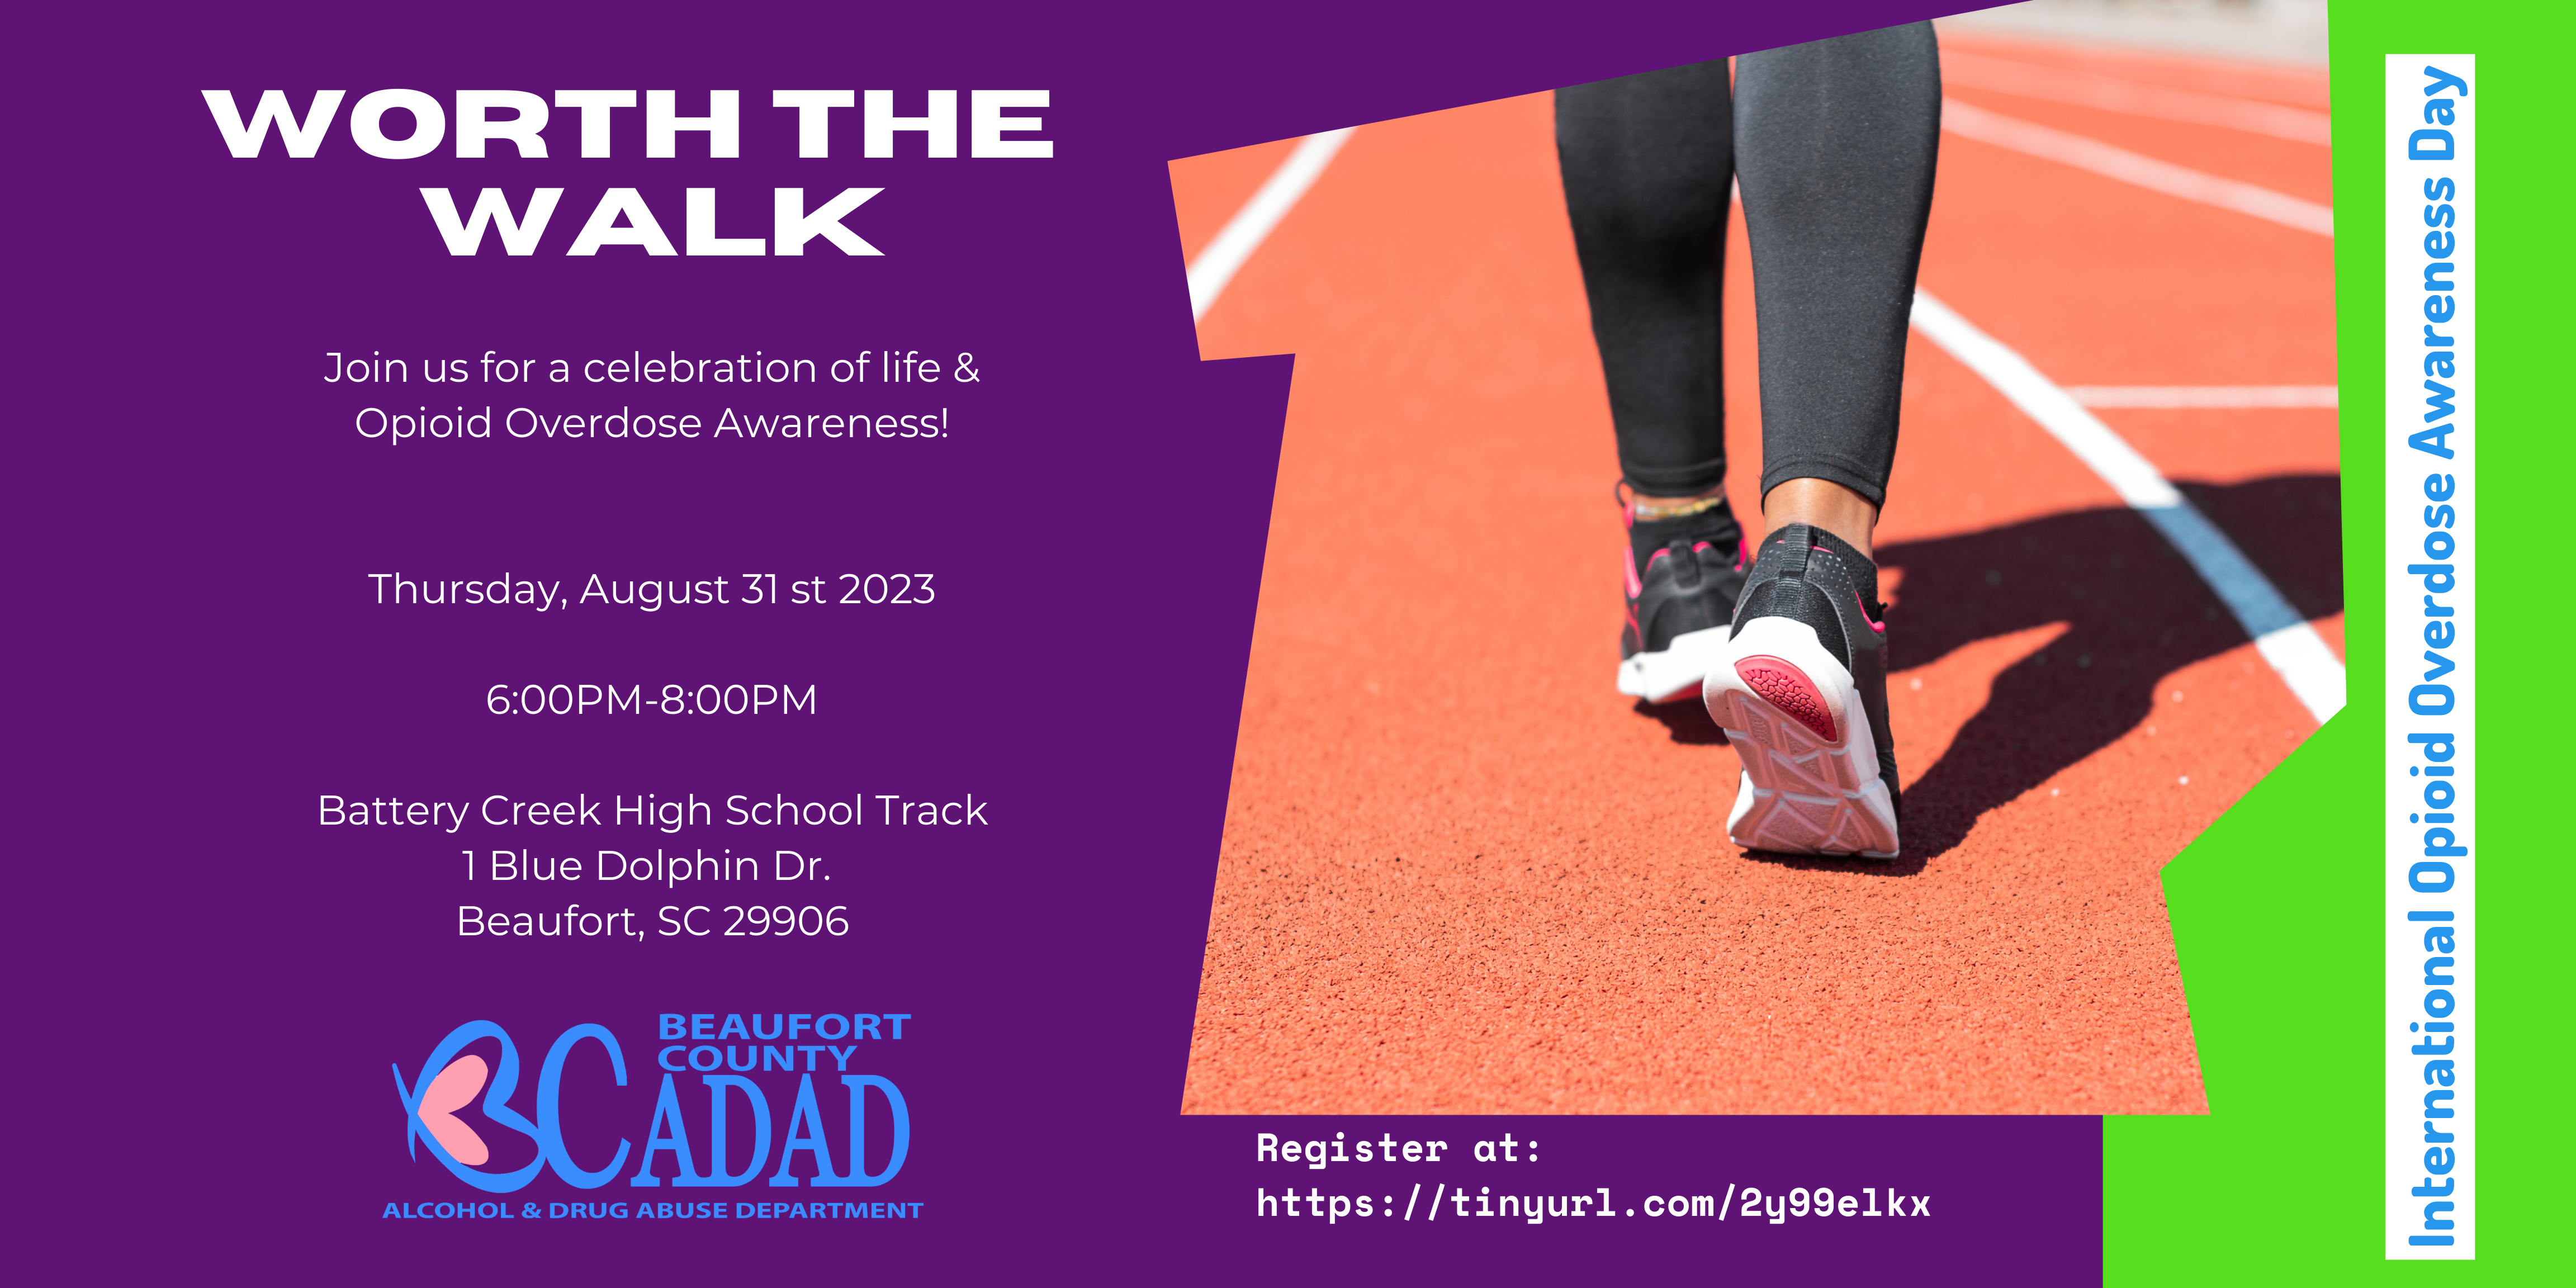 Beaufort County Alcohol and Drug Abuse Department Recognizes International Opioid Overdose Awareness Day with Walk to Celebrate Life